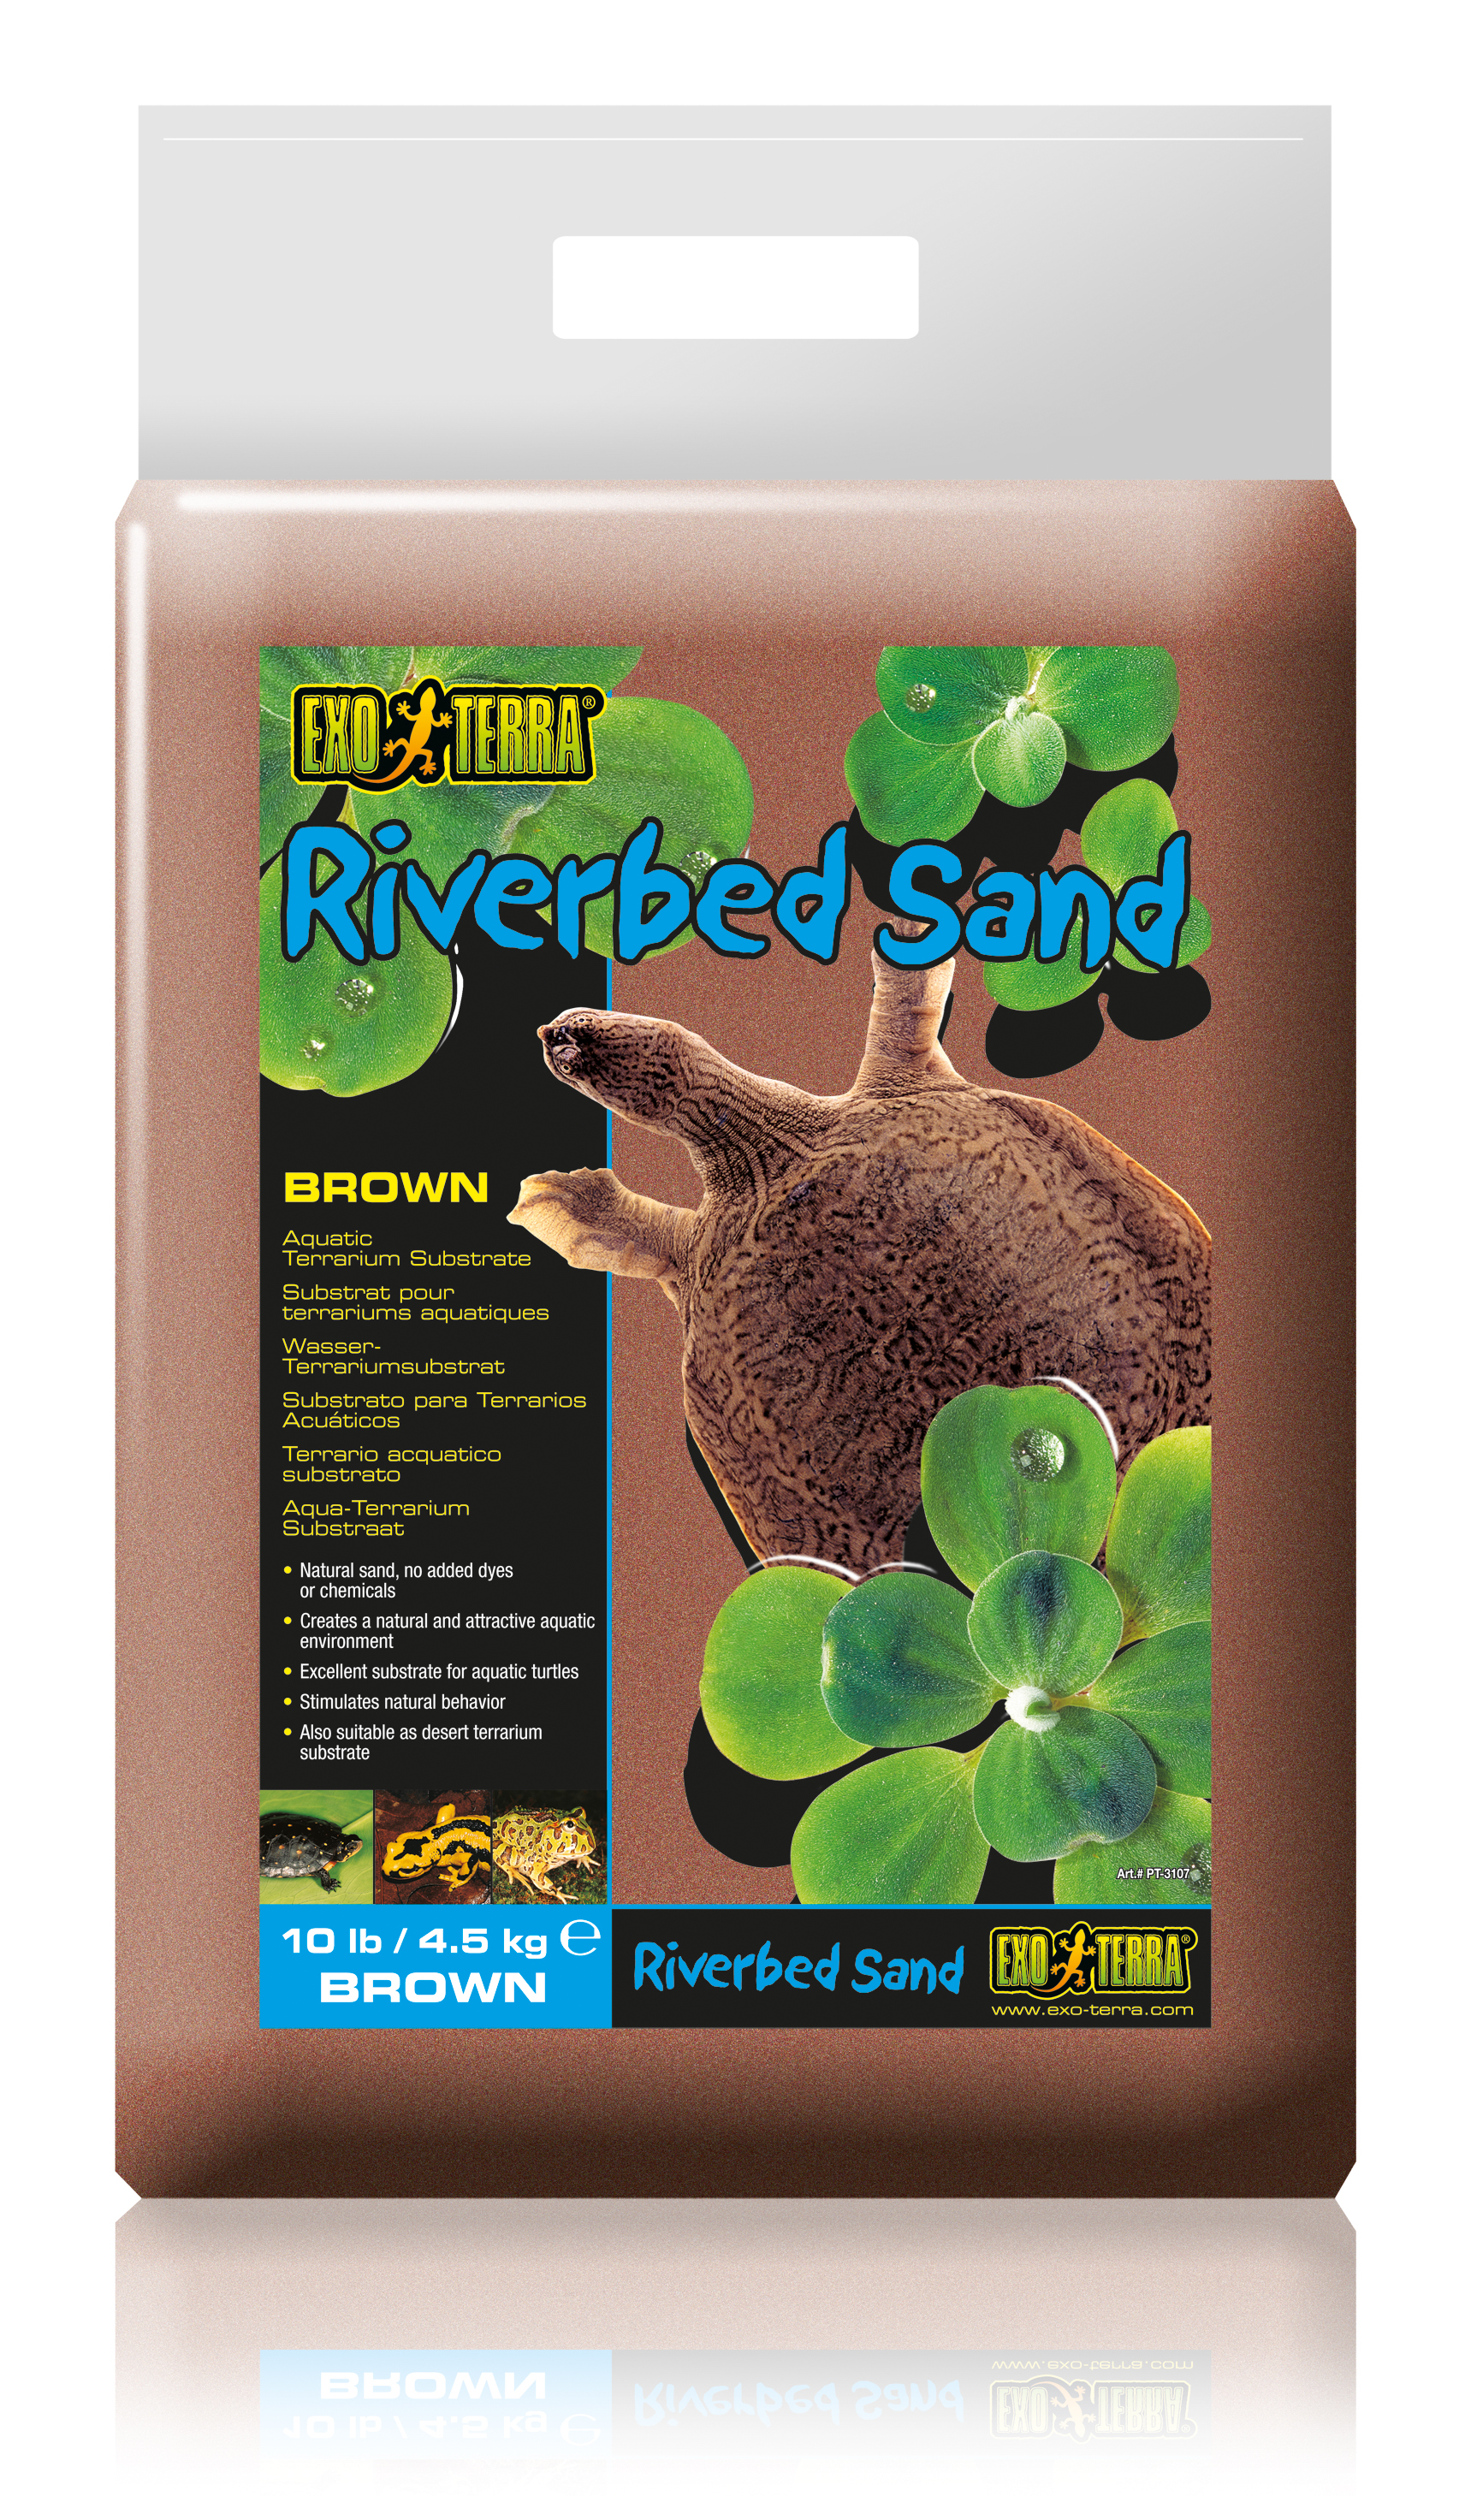 Ex riverbed sand brown - Product shot